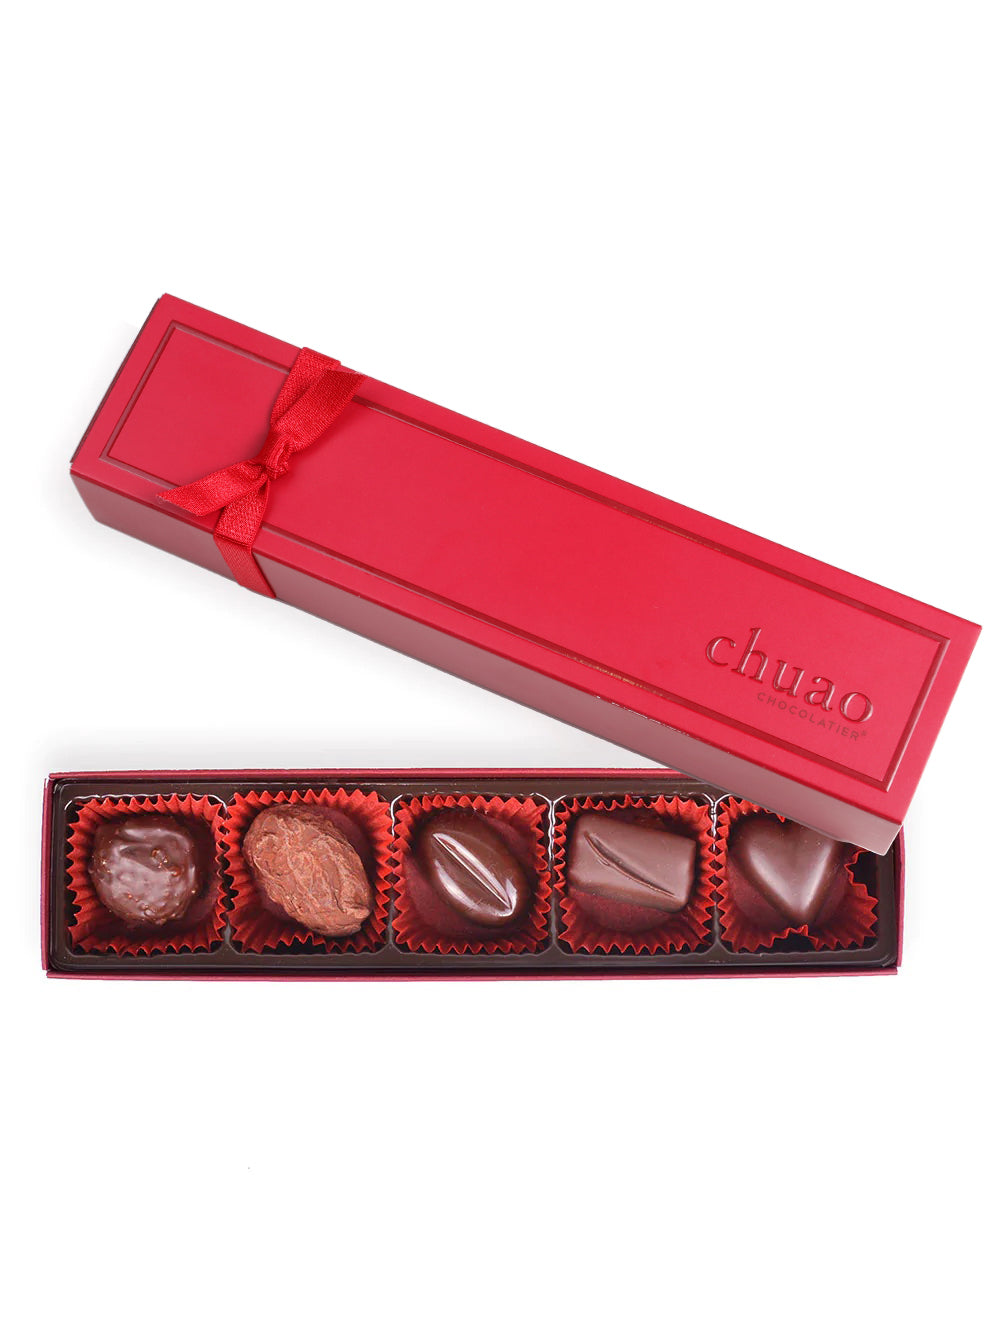 5 pieces of chocolate bonbons and truffles in a red gift box